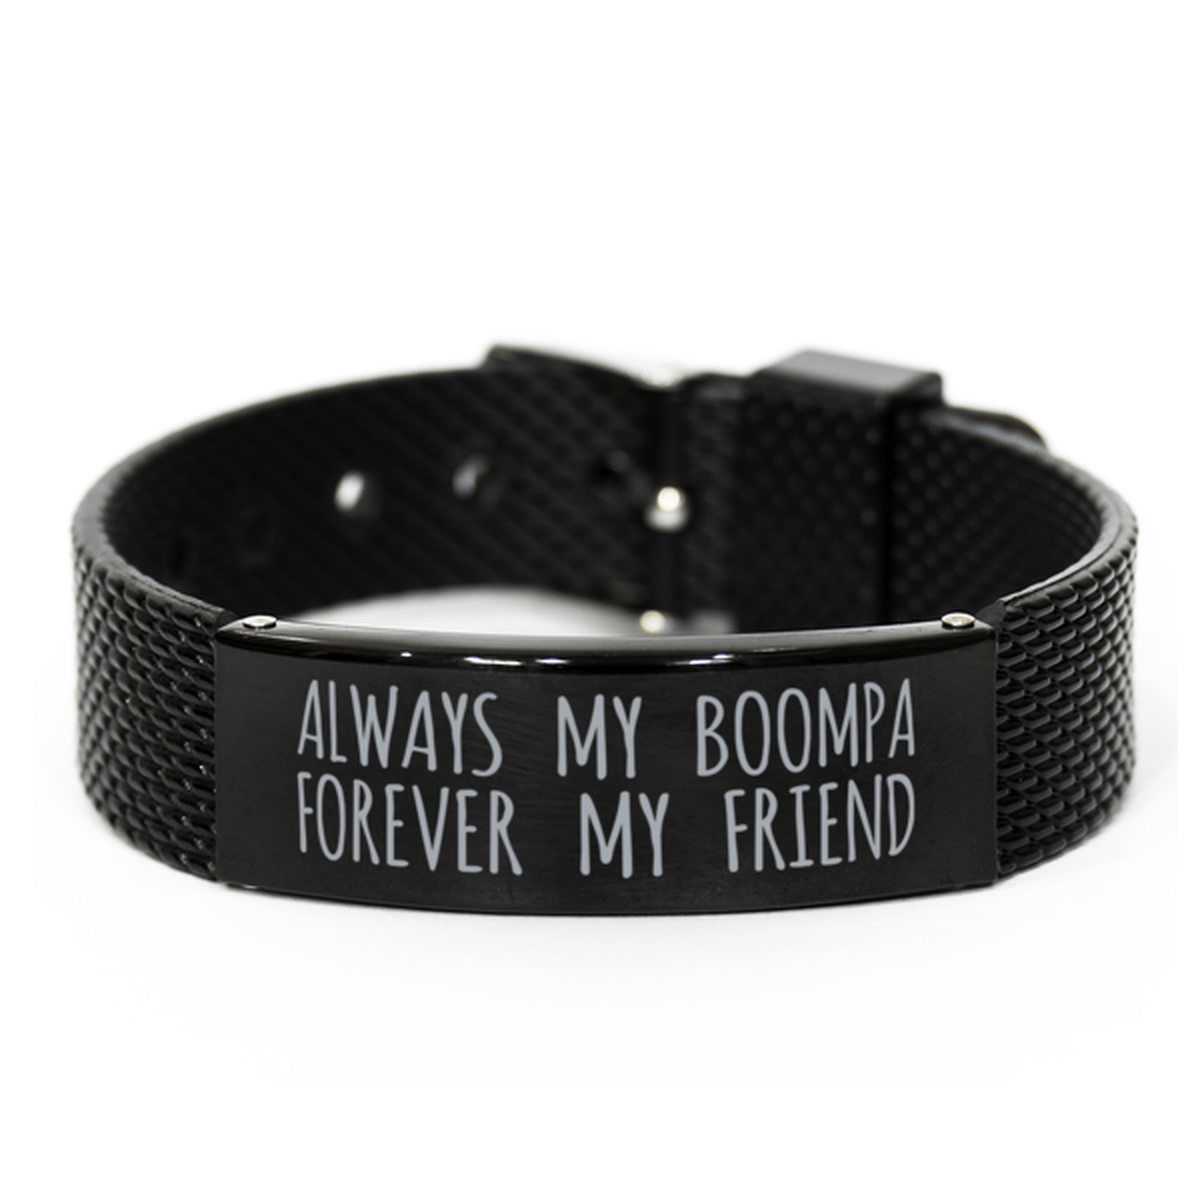 Inspirational Boompa Black Shark Mesh Bracelet, Always My Boompa Forever My Friend, Best Birthday Gifts for Family Friends